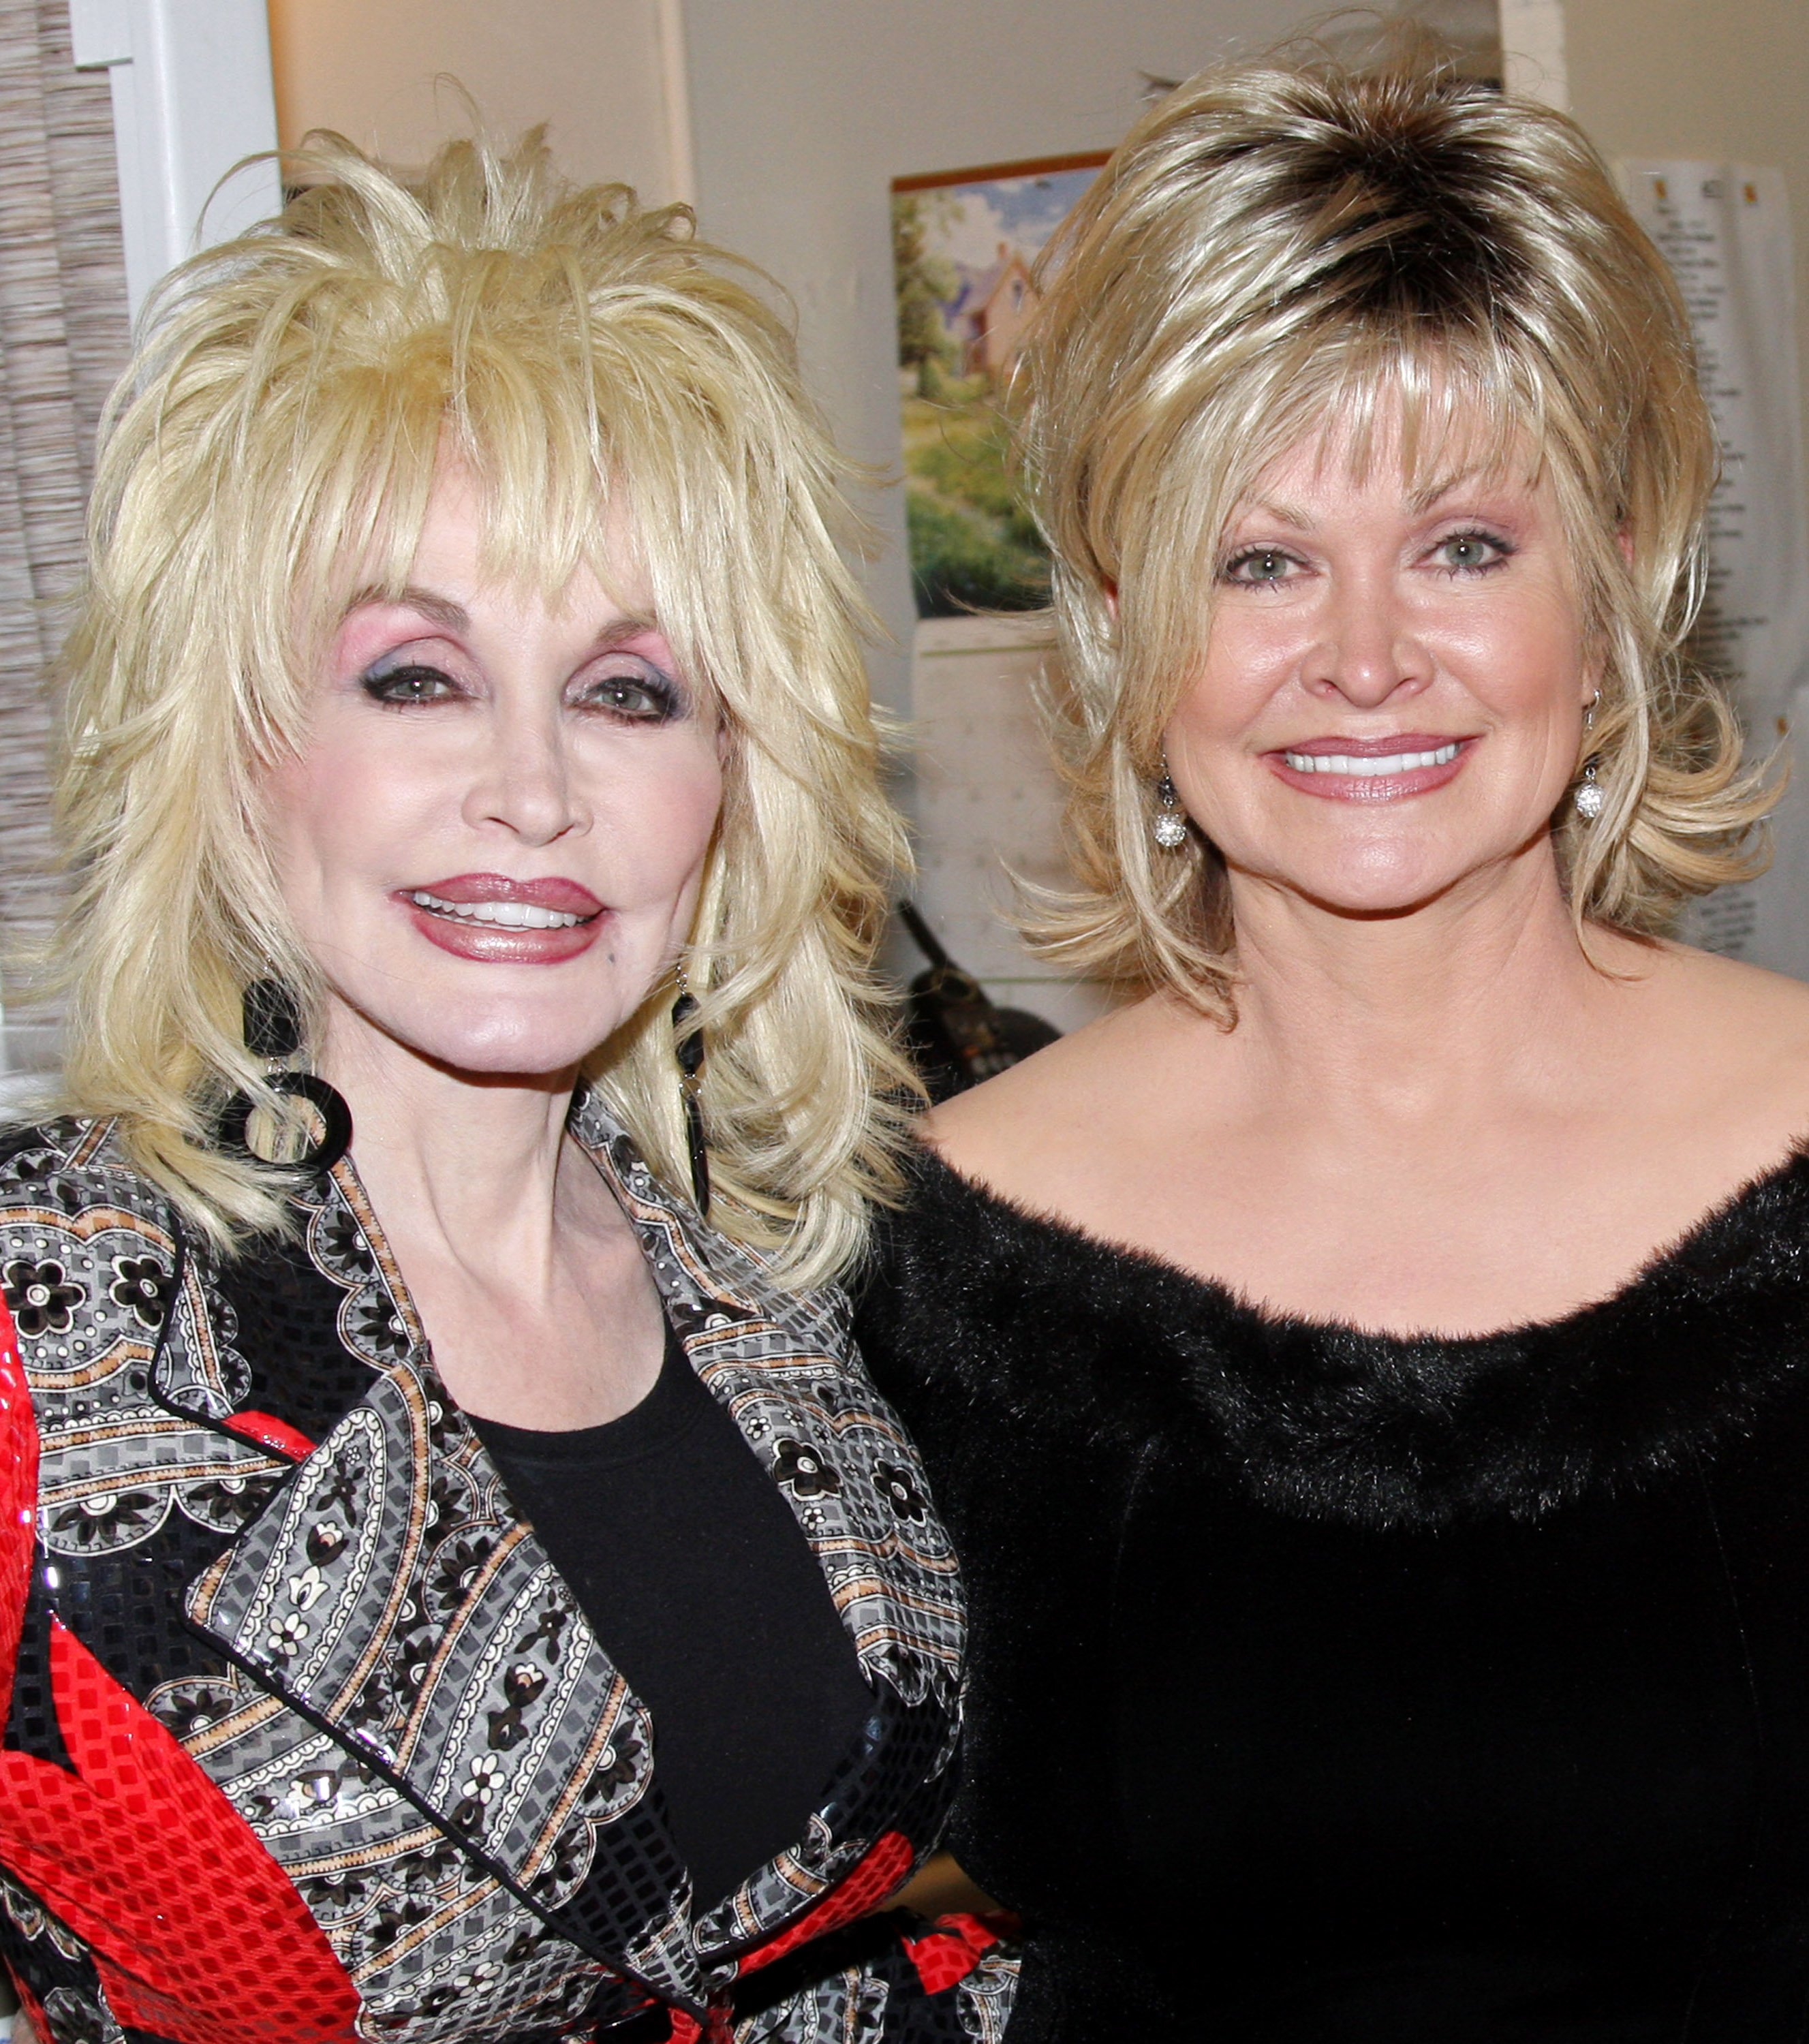 Dolly Parton and her sister Rachel Parton Dennison pose backstage at the musical 9 to 5 on Broadway